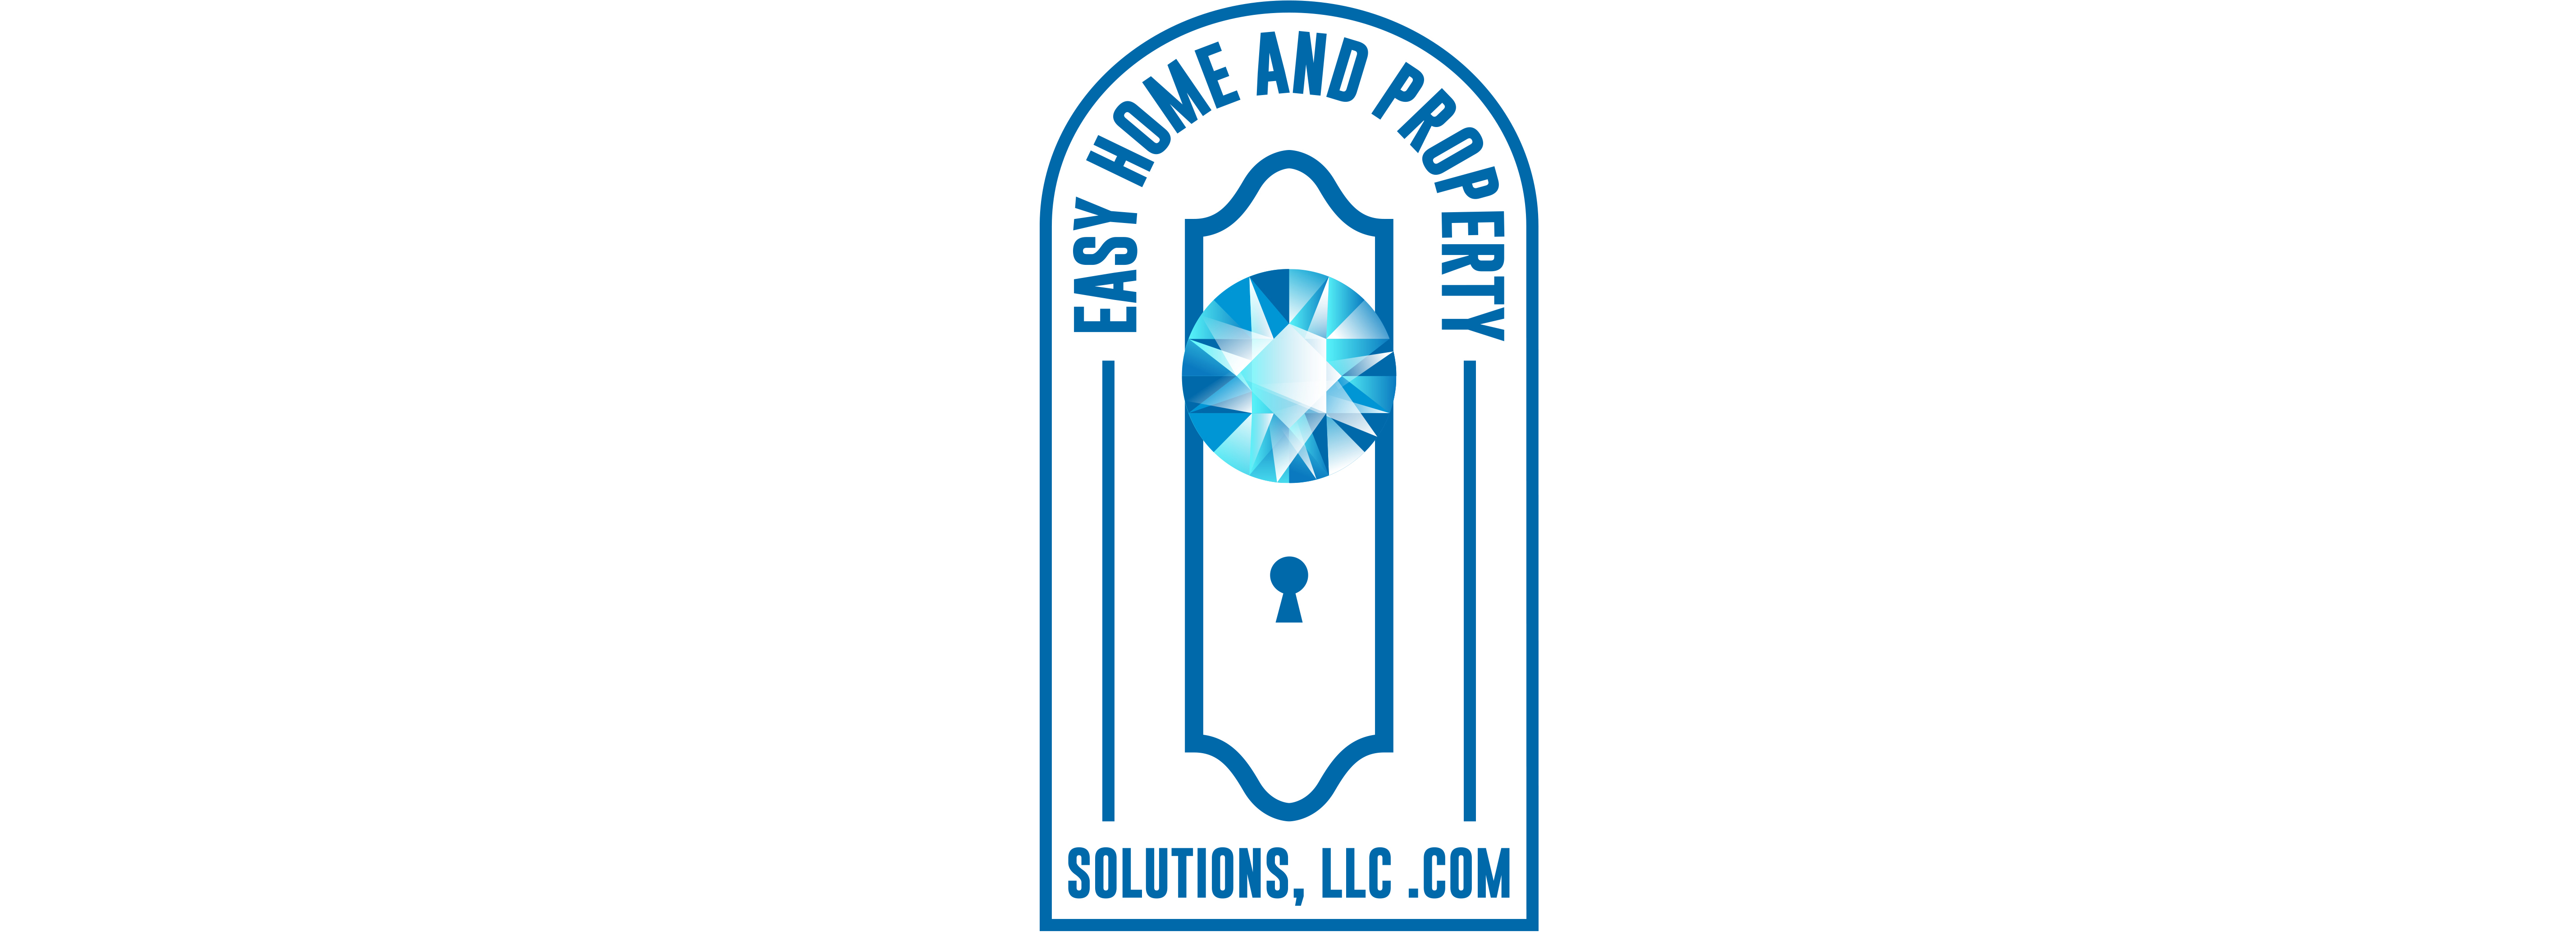 Easy Home And Property Solutions, LLC 